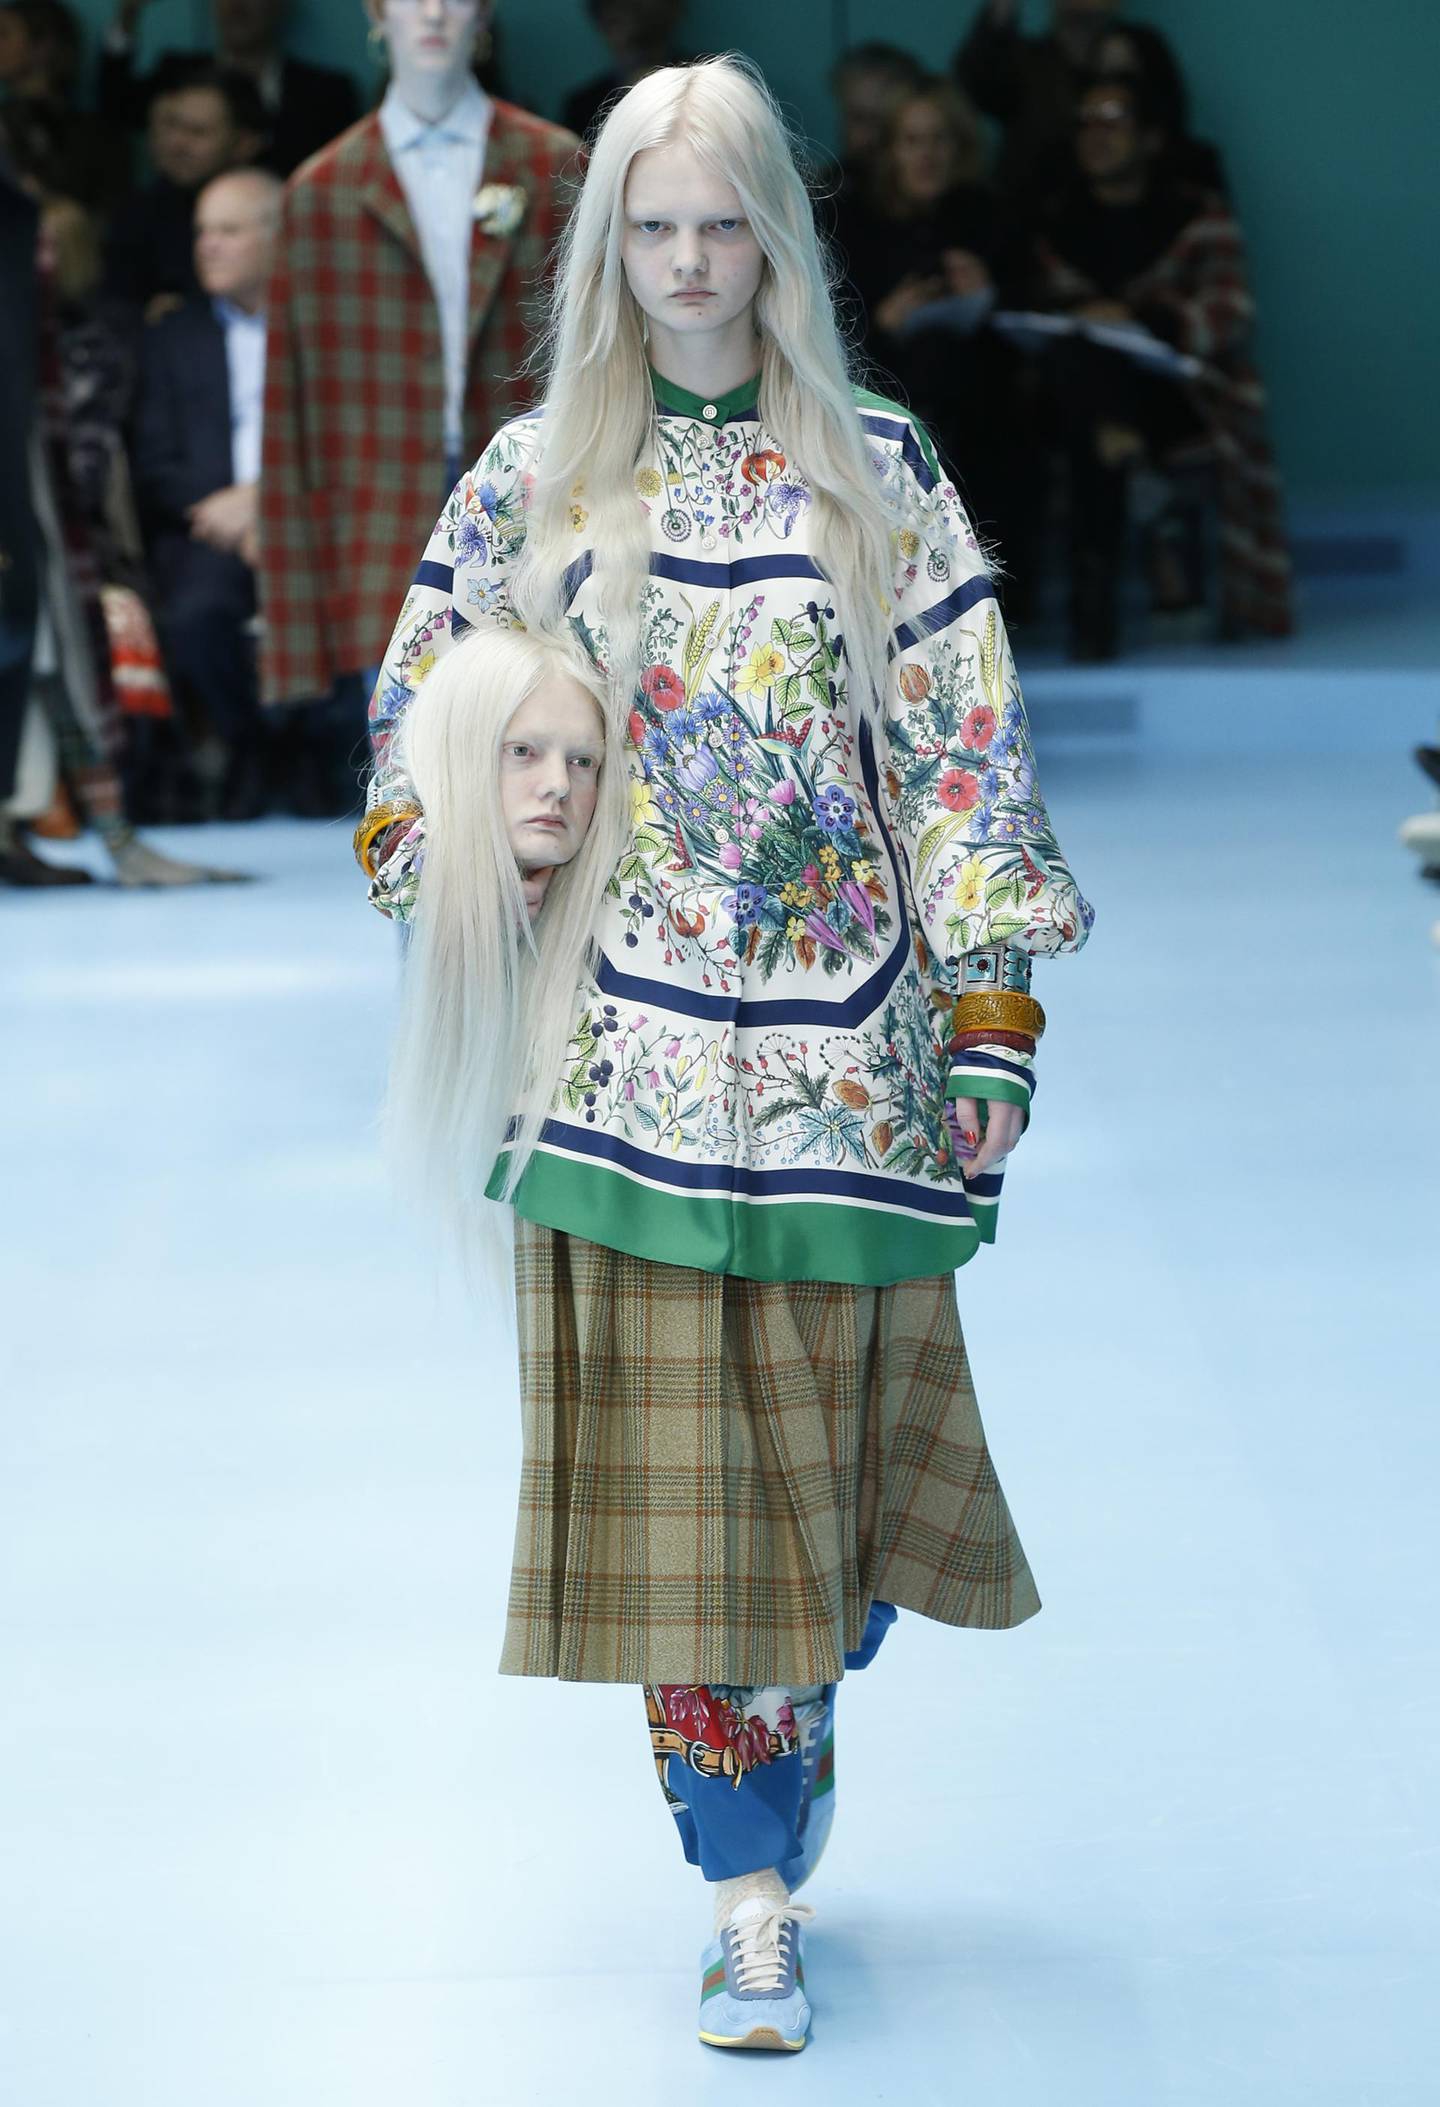 Models carry their own heads at Gucci Autumn Winter 2018 womens collection at Milan Fashion Week